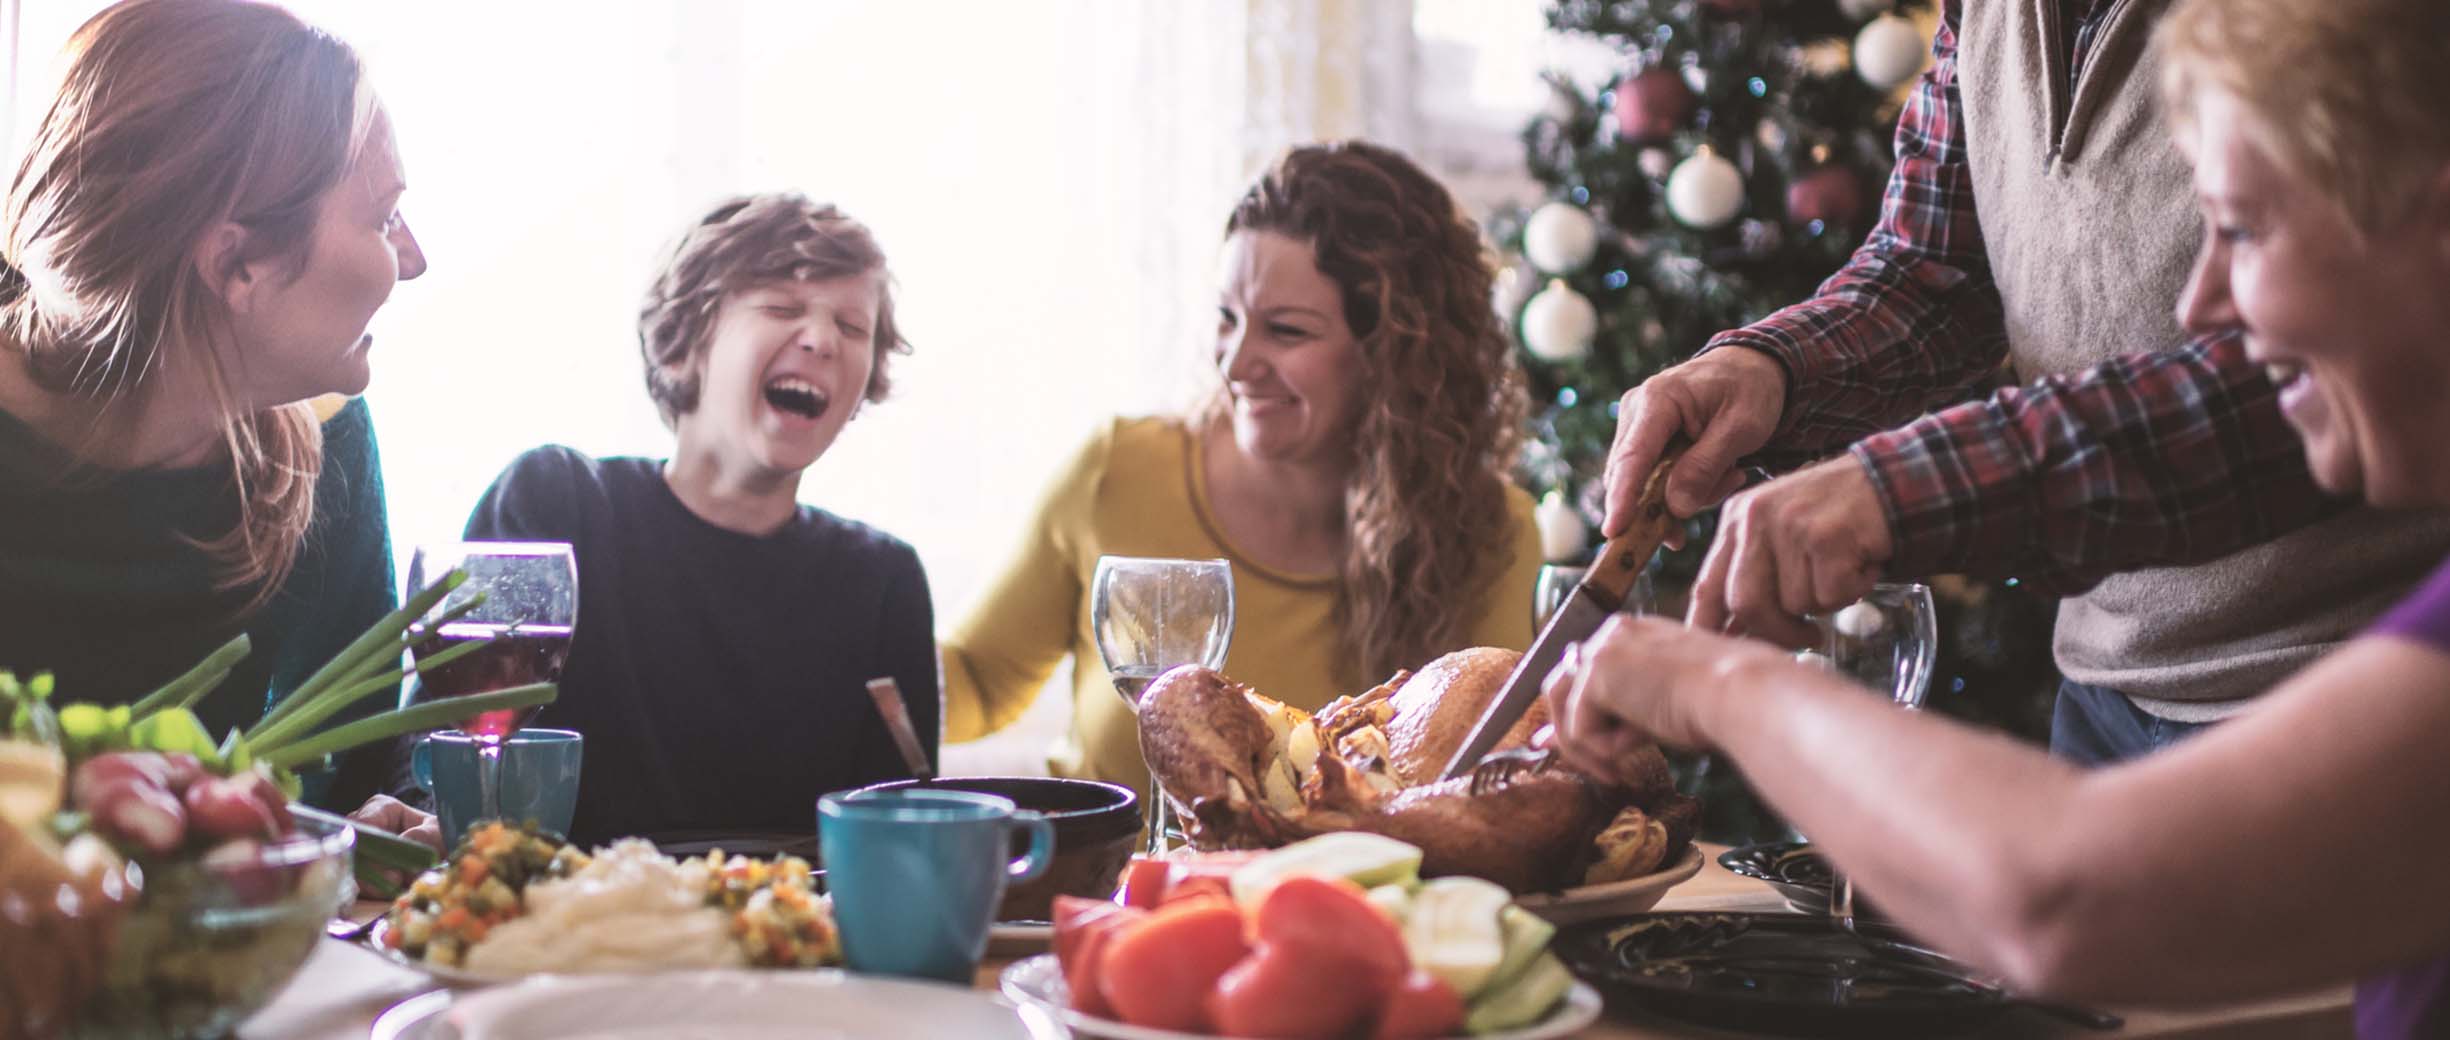 13 Hacks to Get Your Money’s Worth for Your Holiday Dinner